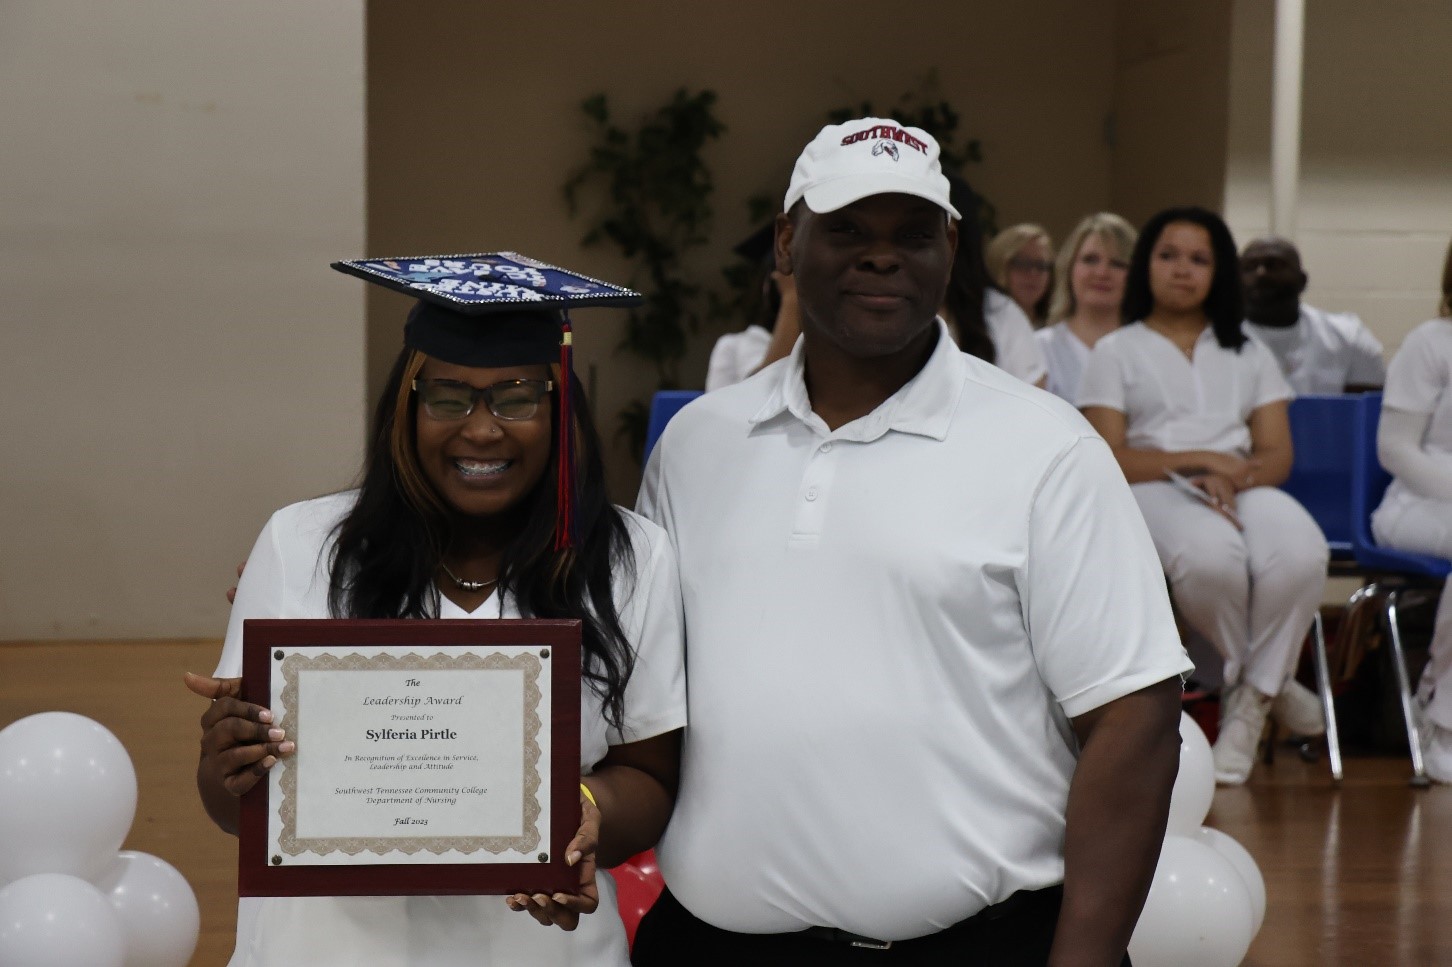 Student Nursing Government Association President Sylferia Pirtle receives her certificate for academic excellence from Department Chair, Dr. Marlon Gibson.